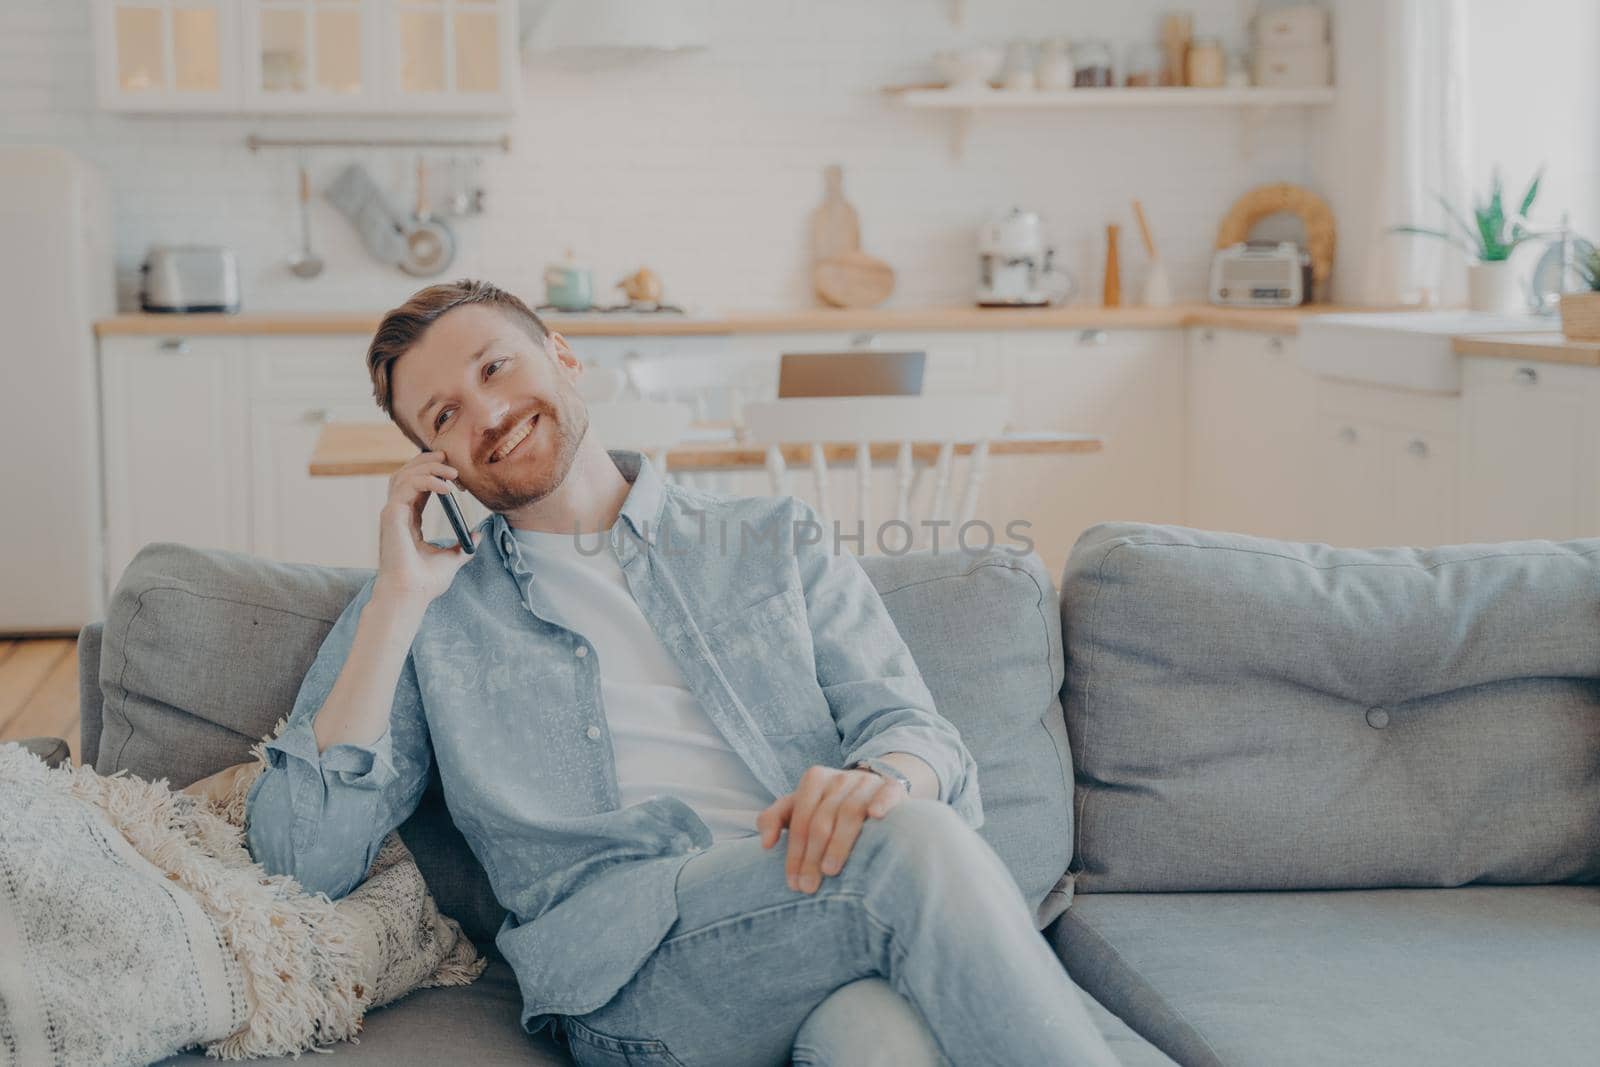 Smiling guy sits on couch at home having fun while talking on modern cellphone gadget by vkstock